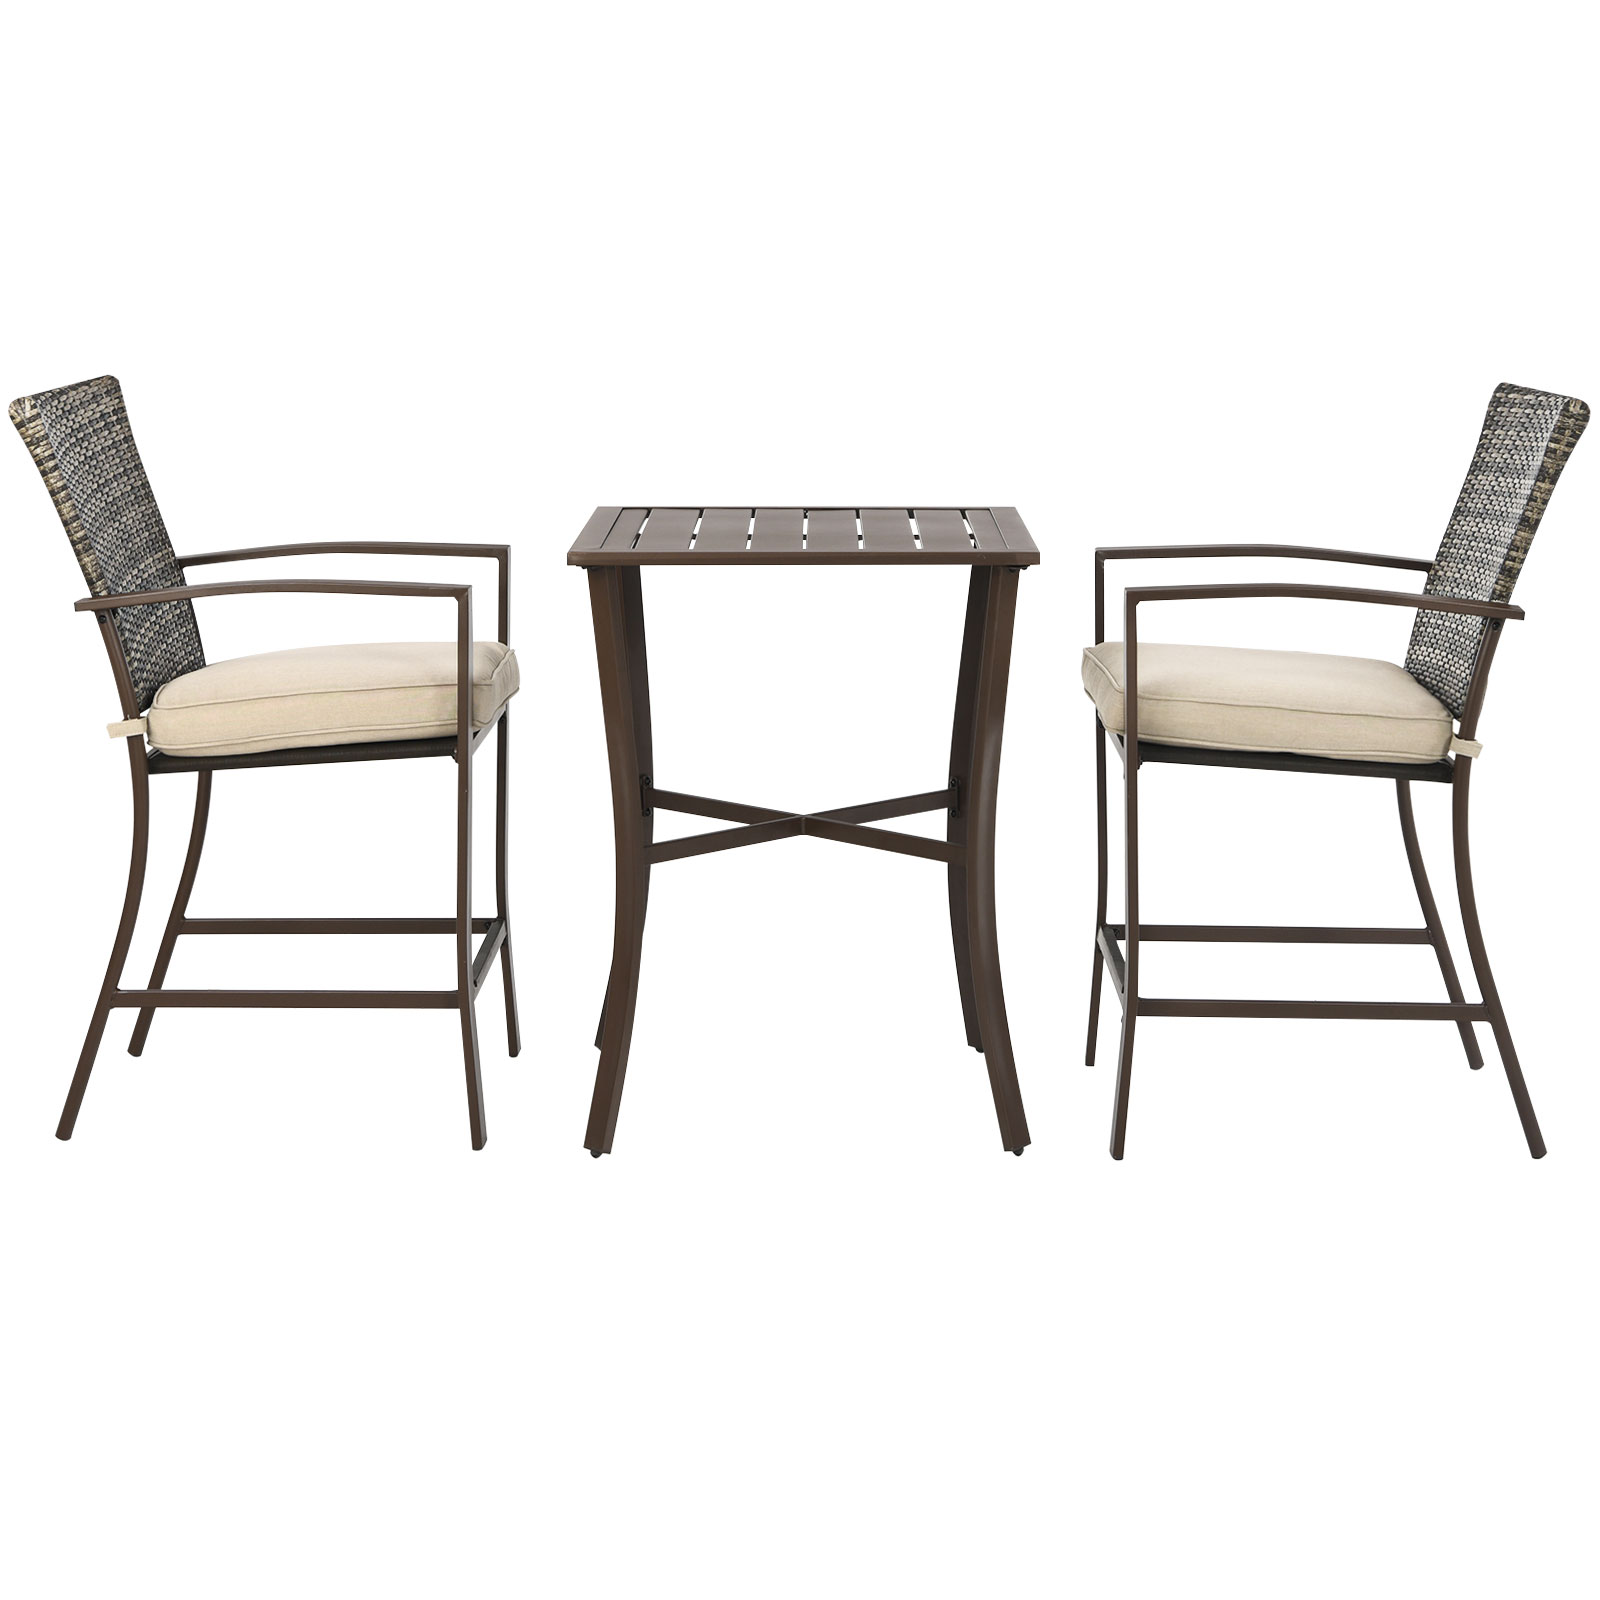 Patiojoy 3-Piece Patio Rattan Furniture Set Outdoor Bistro Set Cushioned Chairs & Table Set Brown - image 5 of 5